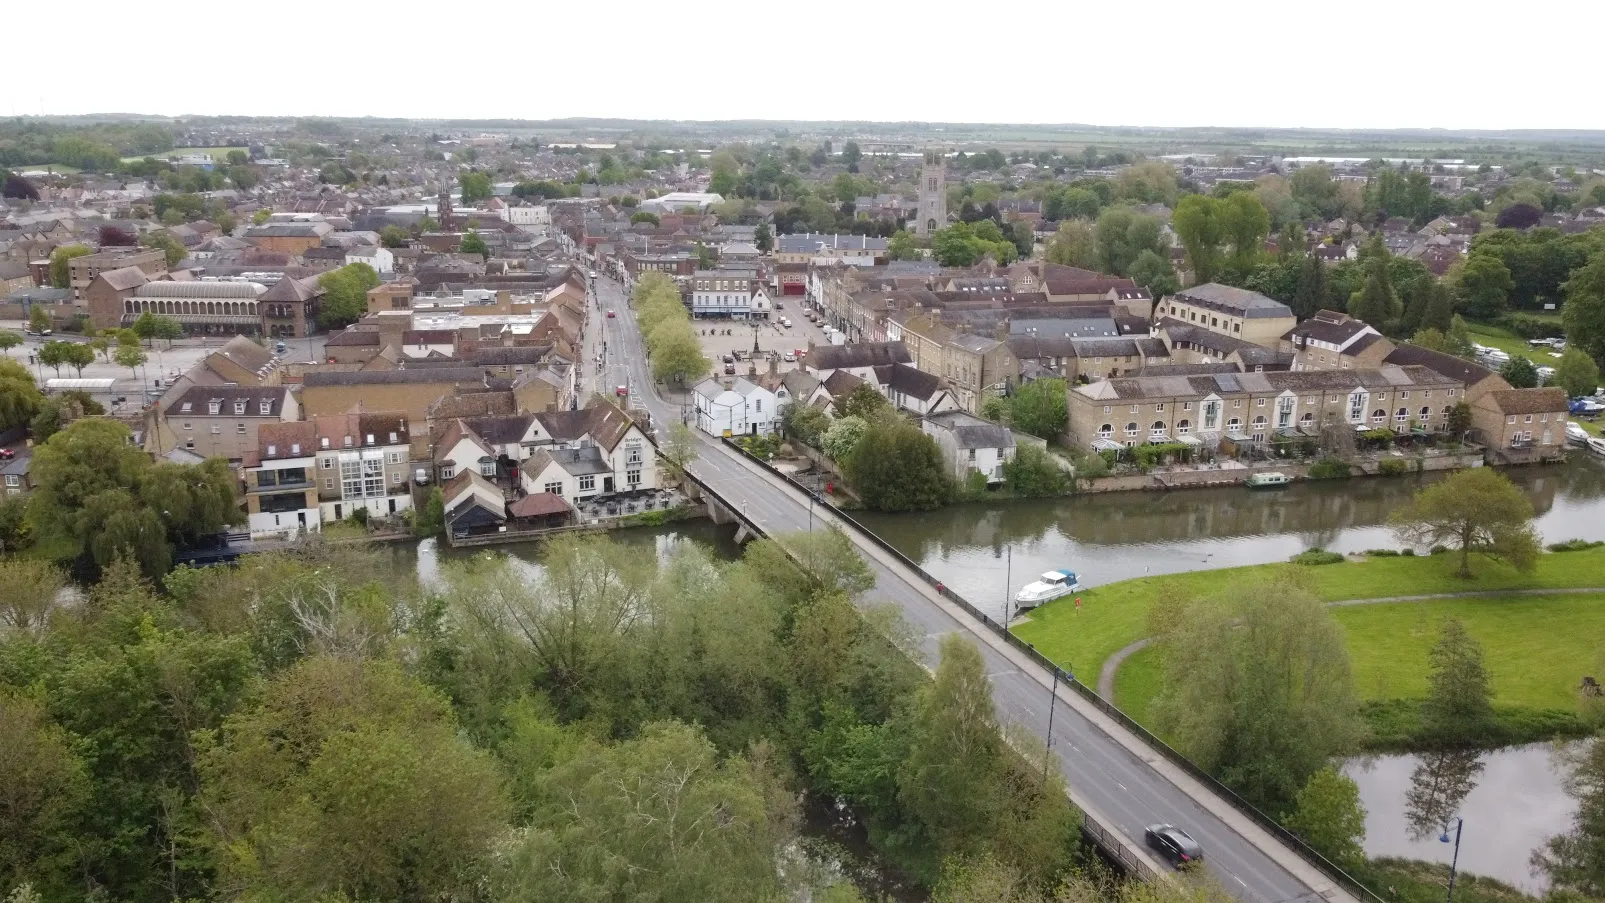 Photo showing: An aerial view of part of St Neots, England. The view is WNW and shows St Neots bridge foreground, the Bridge Hotel left, the Market Place upper centre, and the parish church right upper centre